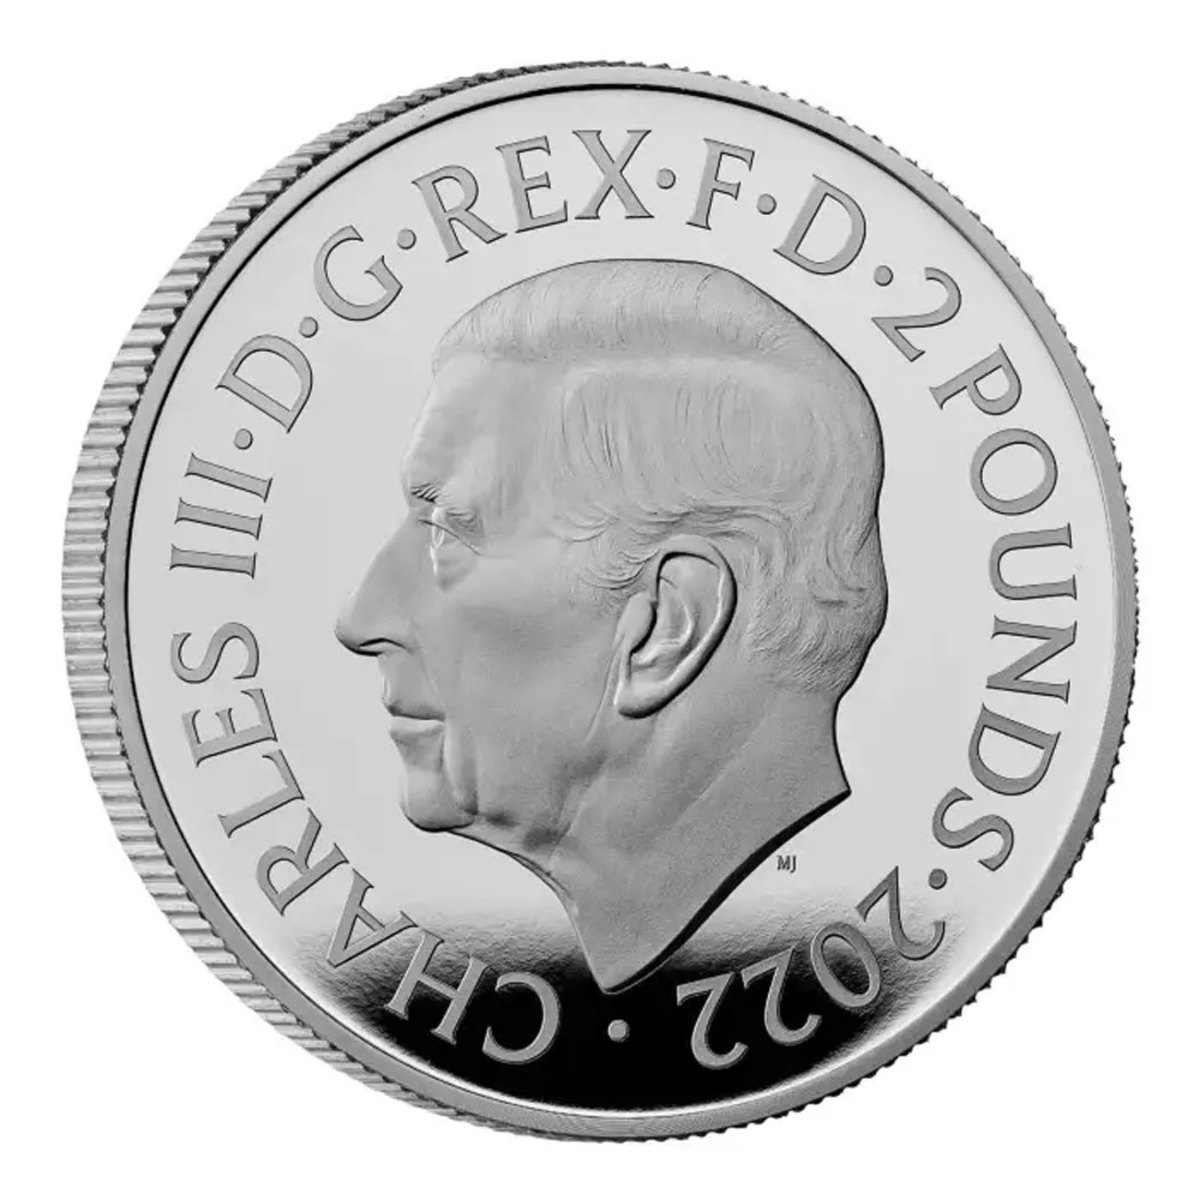 The new official effigy of King Charles III is being featured for the first time on the obverse of the coins in the new collection honoring the late Queen Elizabeth. (Image courtesy of the Royal Mint).